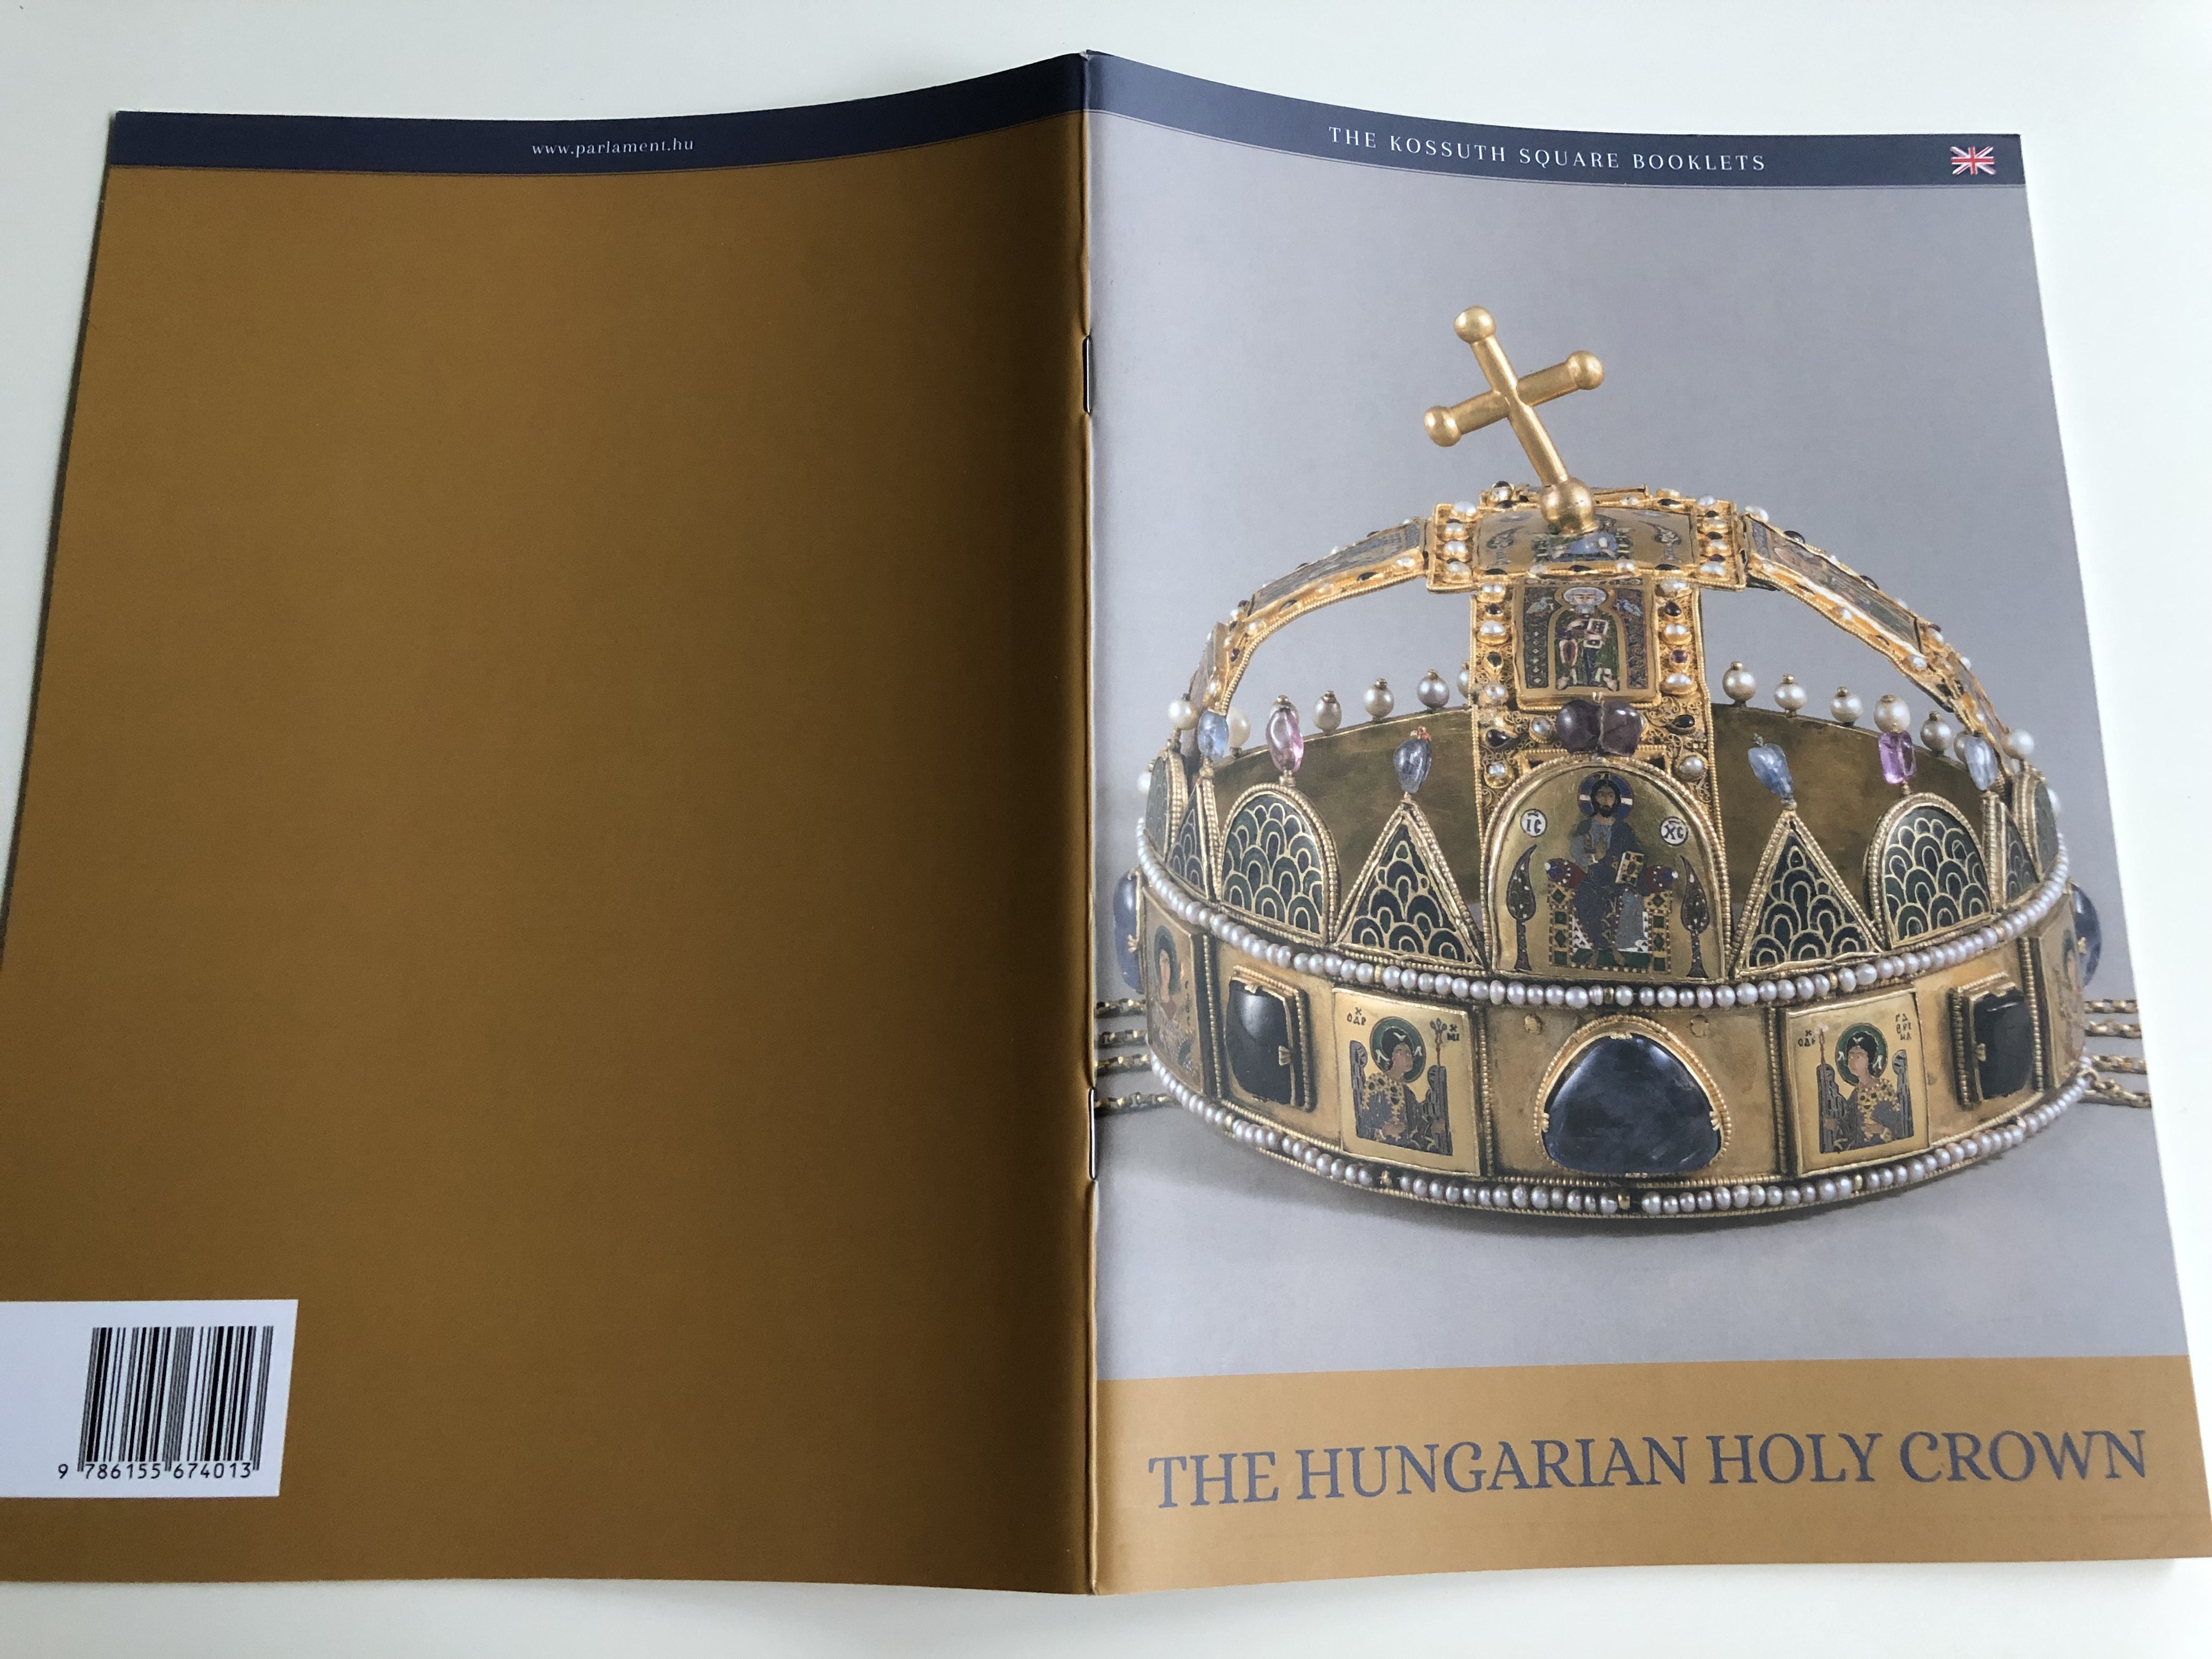 the-hungarian-holy-crown-by-orsolya-moravetz-the-kossuth-square-booklets-the-office-of-the-hungarian-national-assembly-2018-18-.jpg